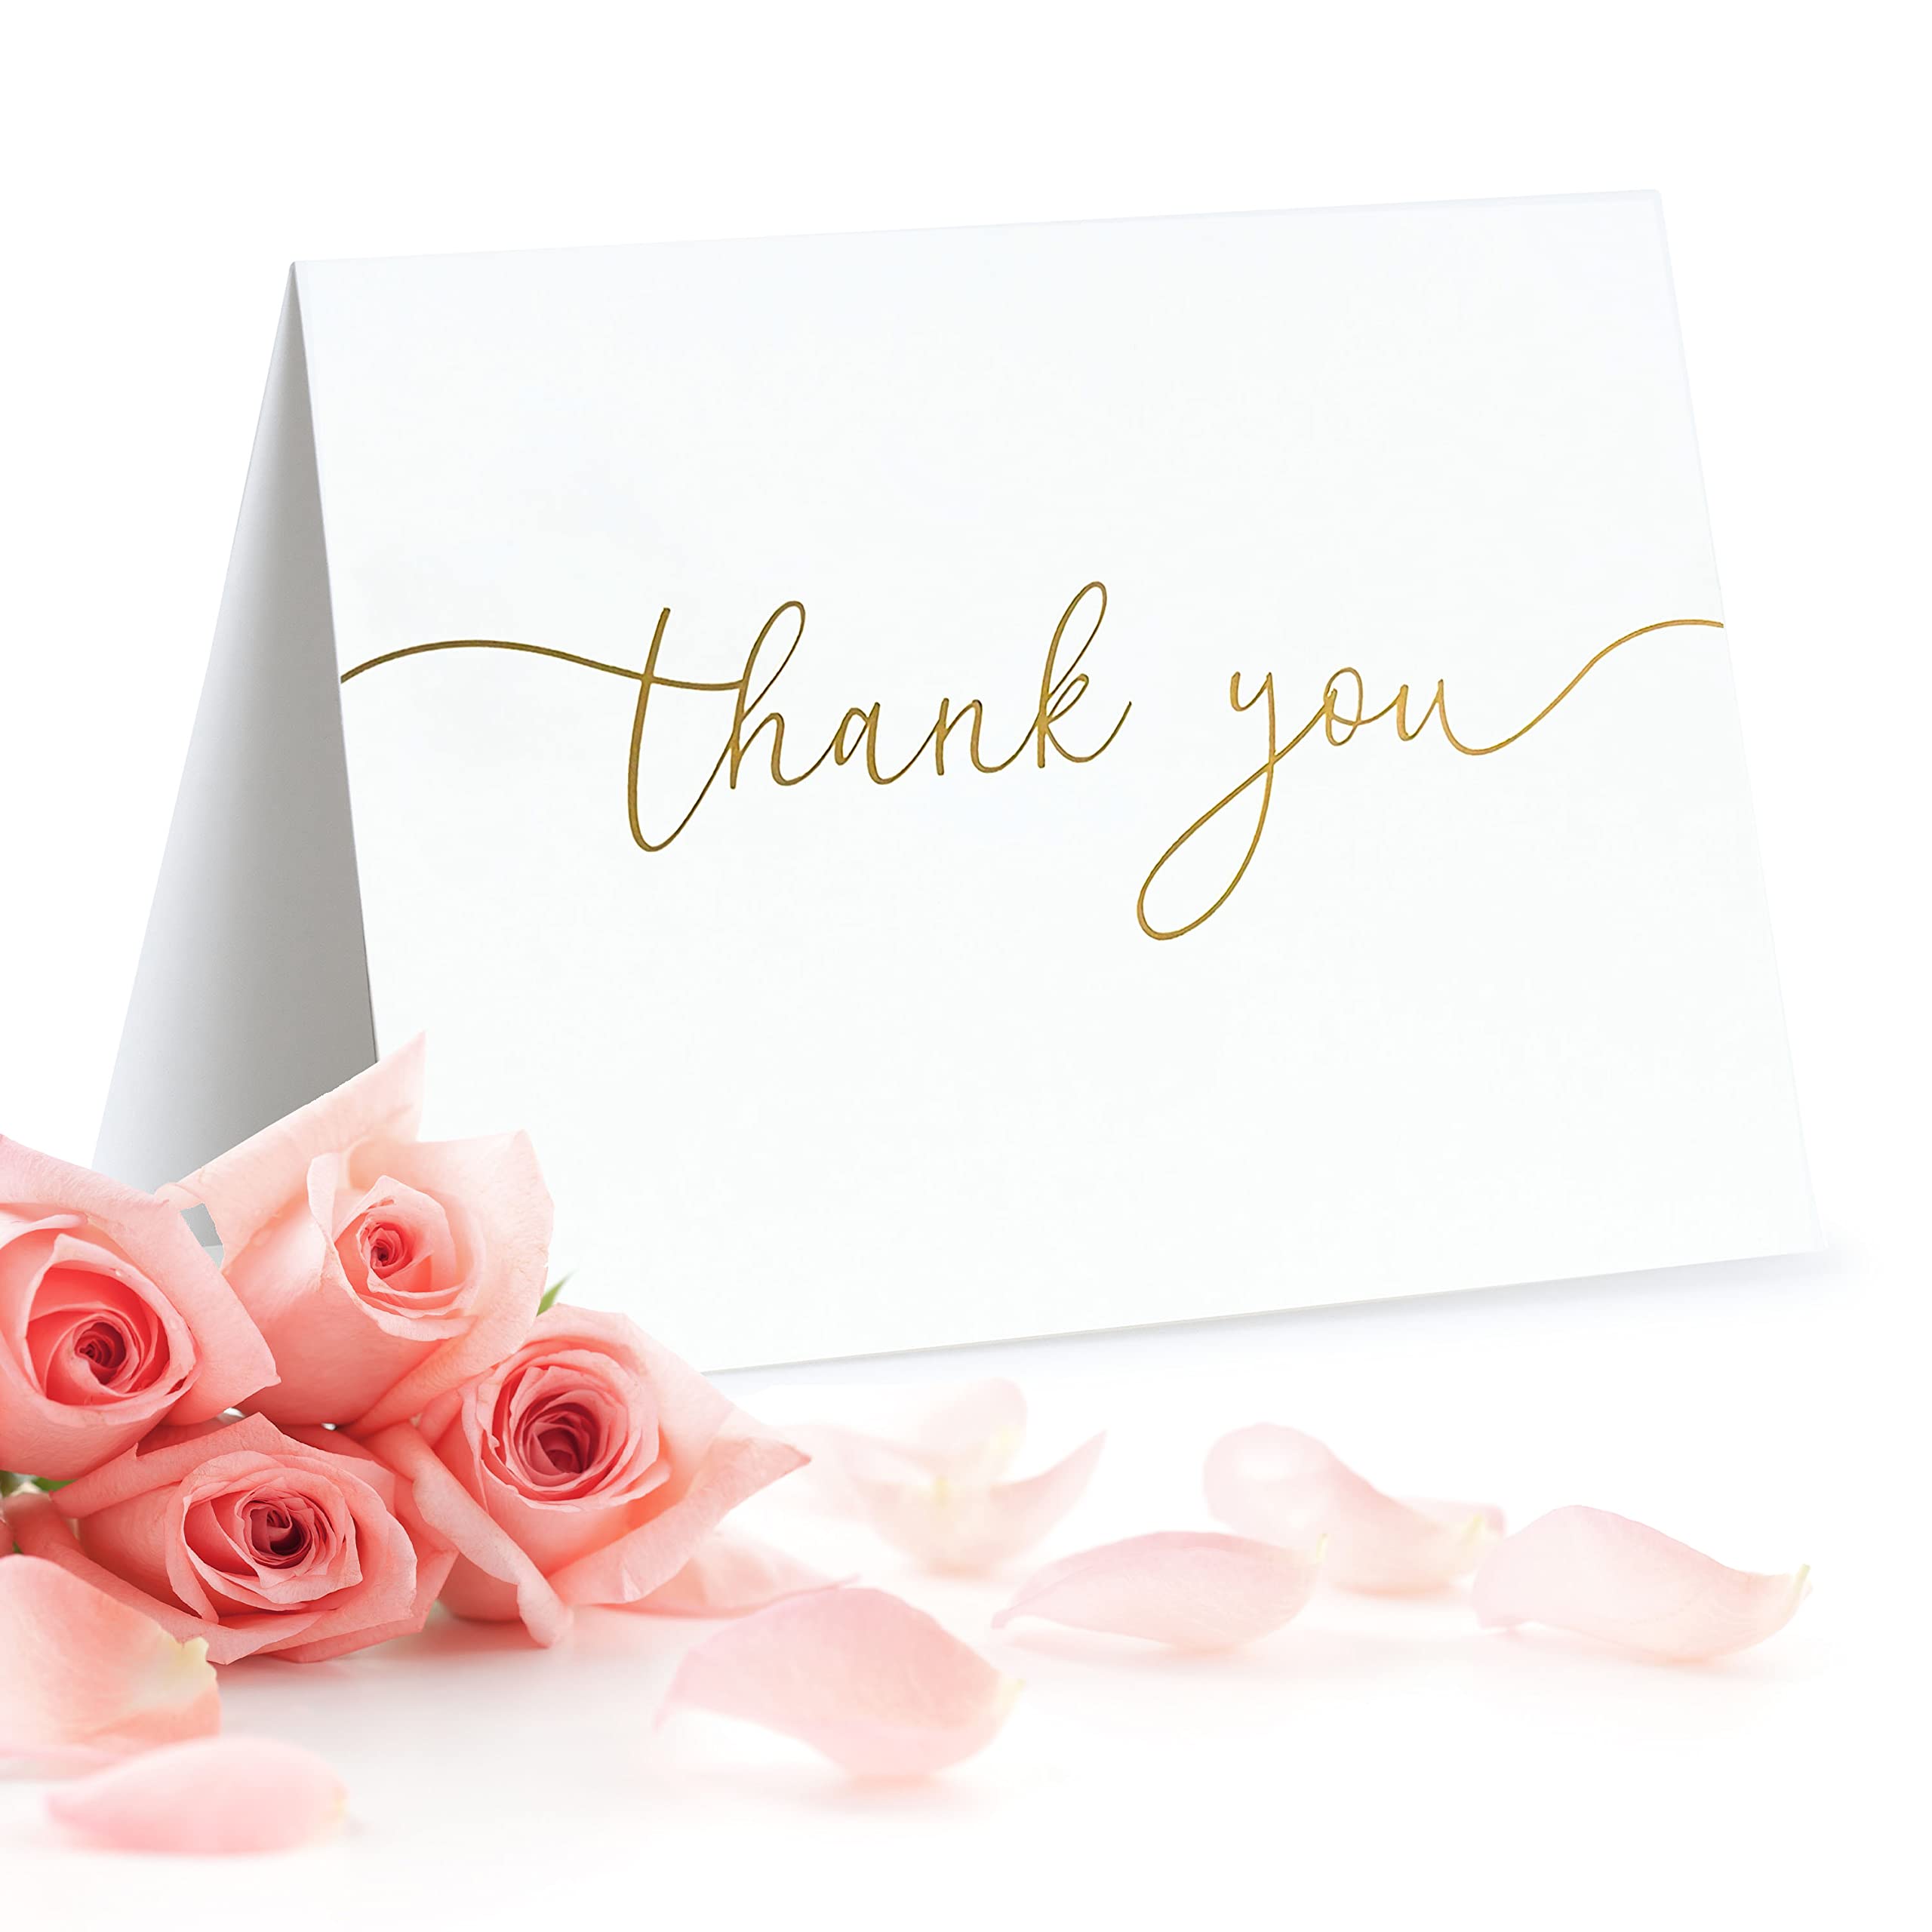 100 Bulk Thank You Cards with Envelopes - Blank Cards and Envelopes - Thank You Cards Wedding with Envelopes Set - Gold Script Thank You Notes - Thank You Cards Bridal Shower (4 x 6 Inches) (100 Pack)